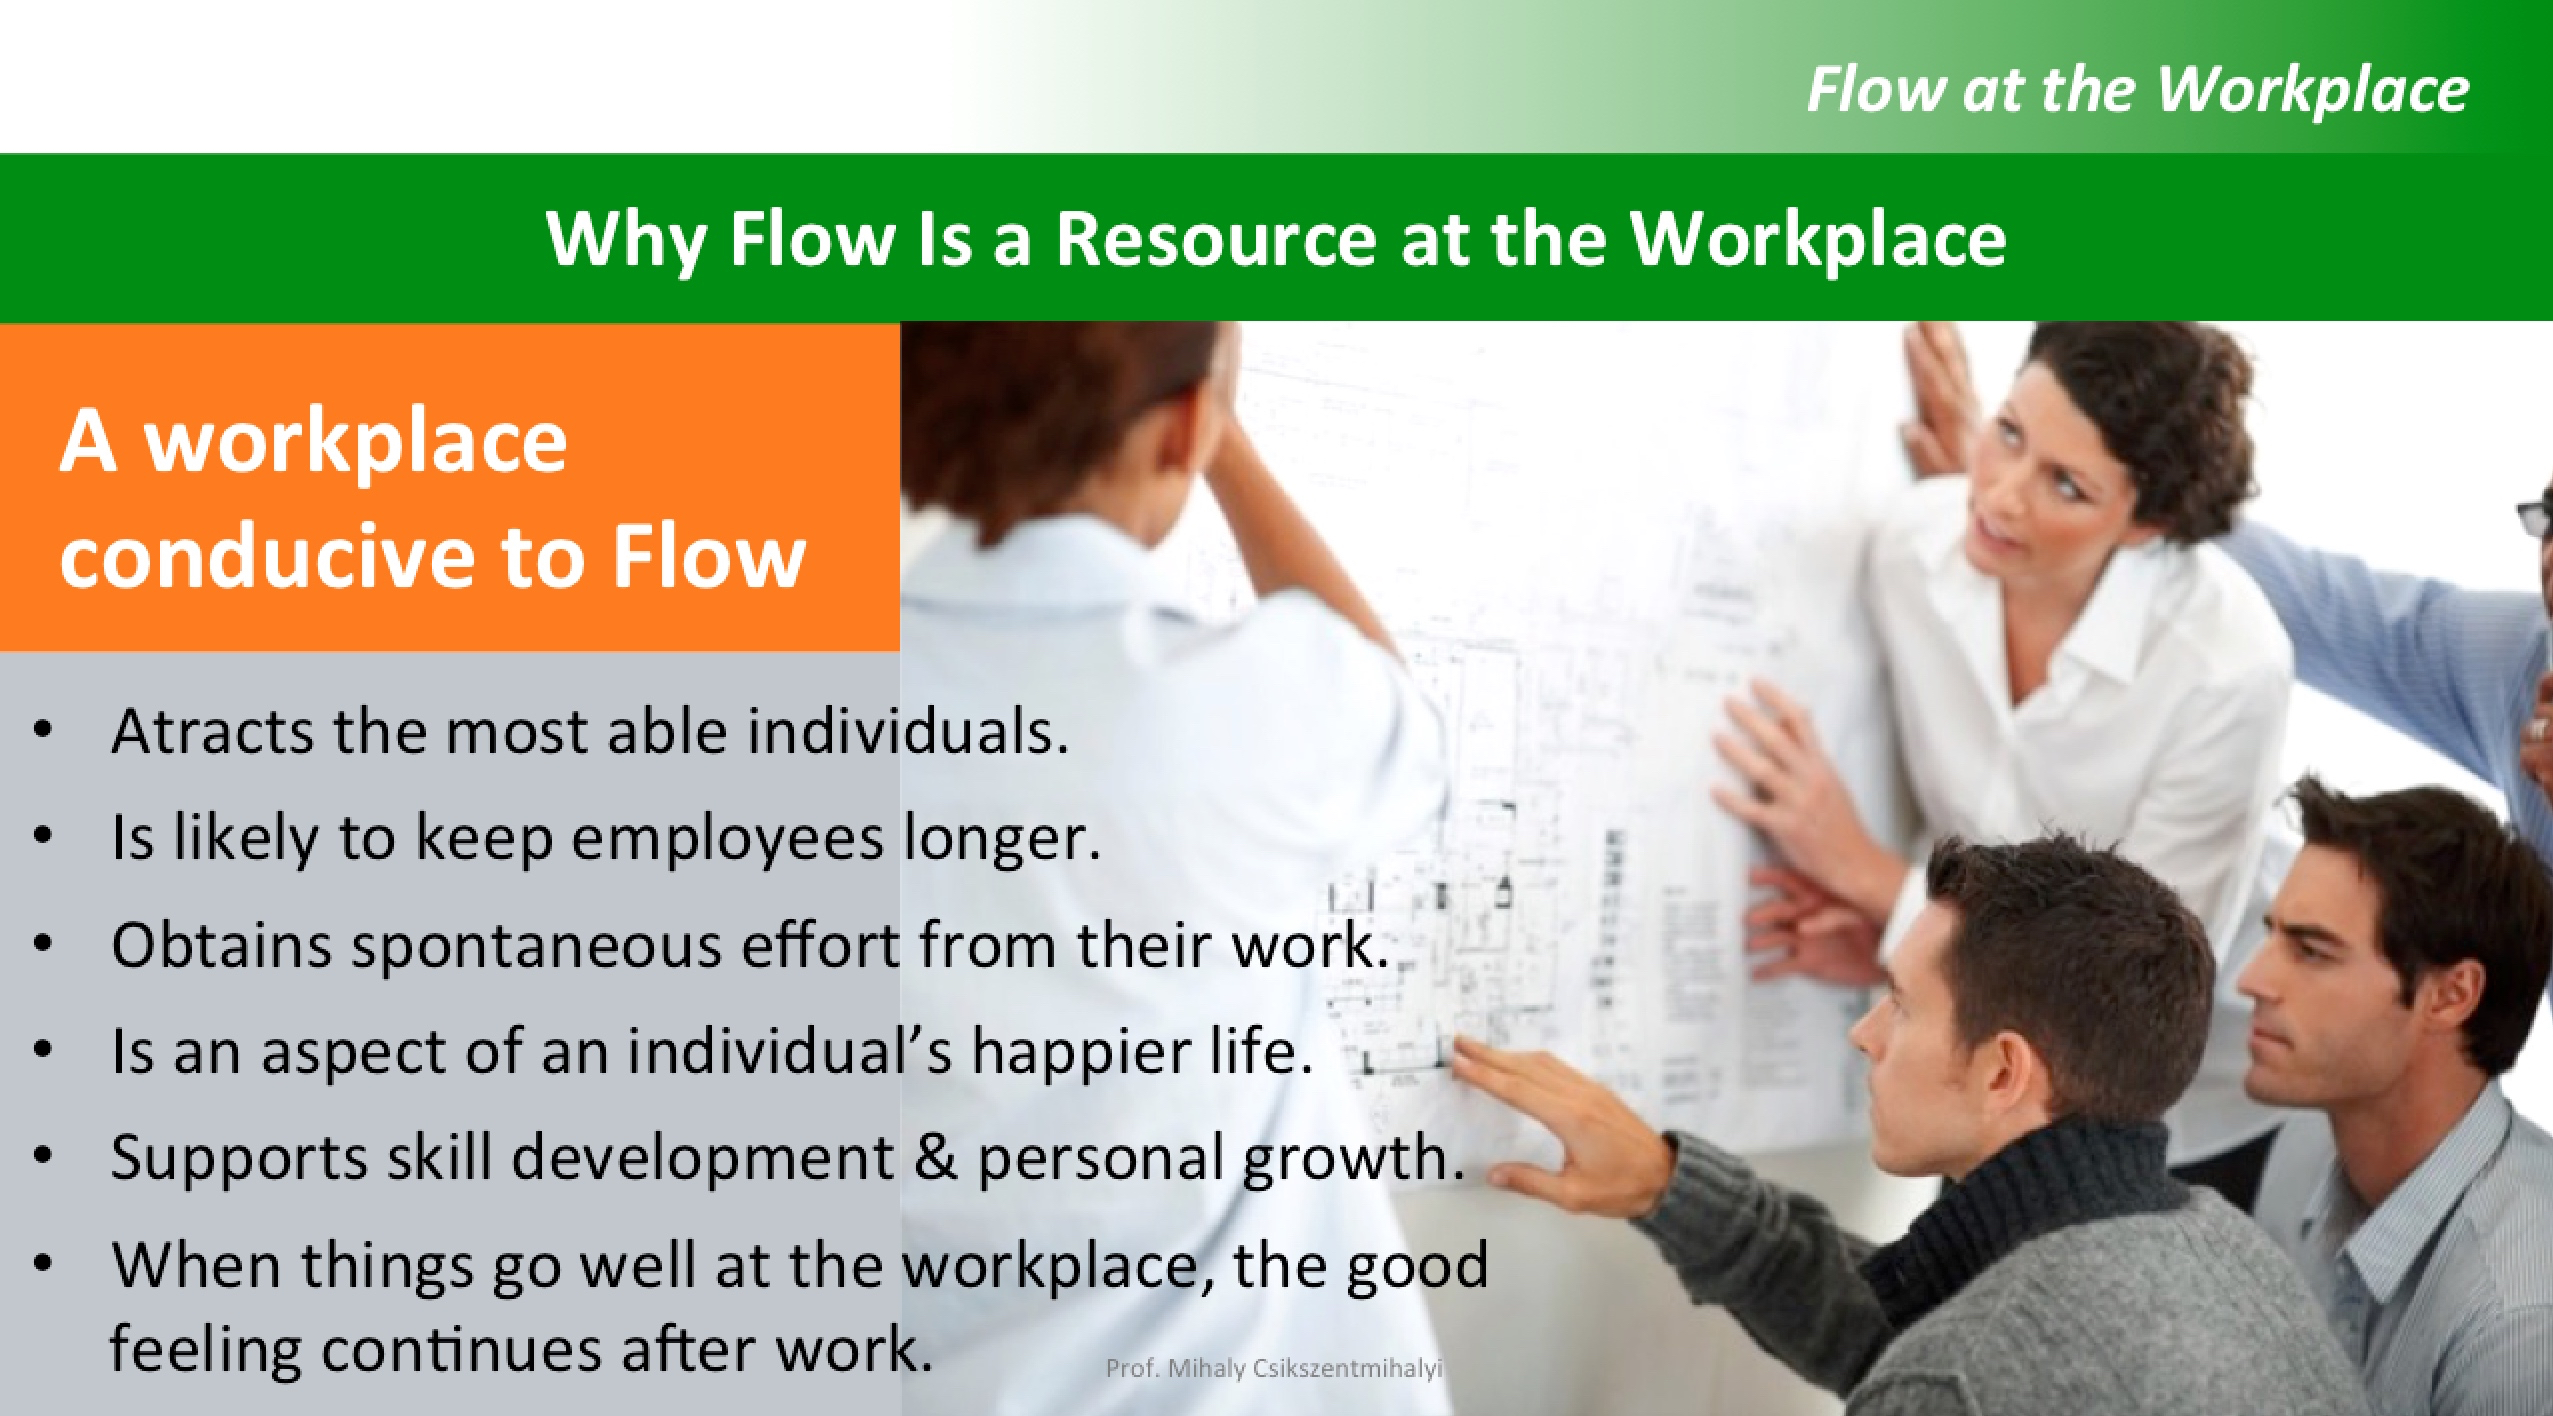 A Workplace Conducive to Flow - Leadership & Flow